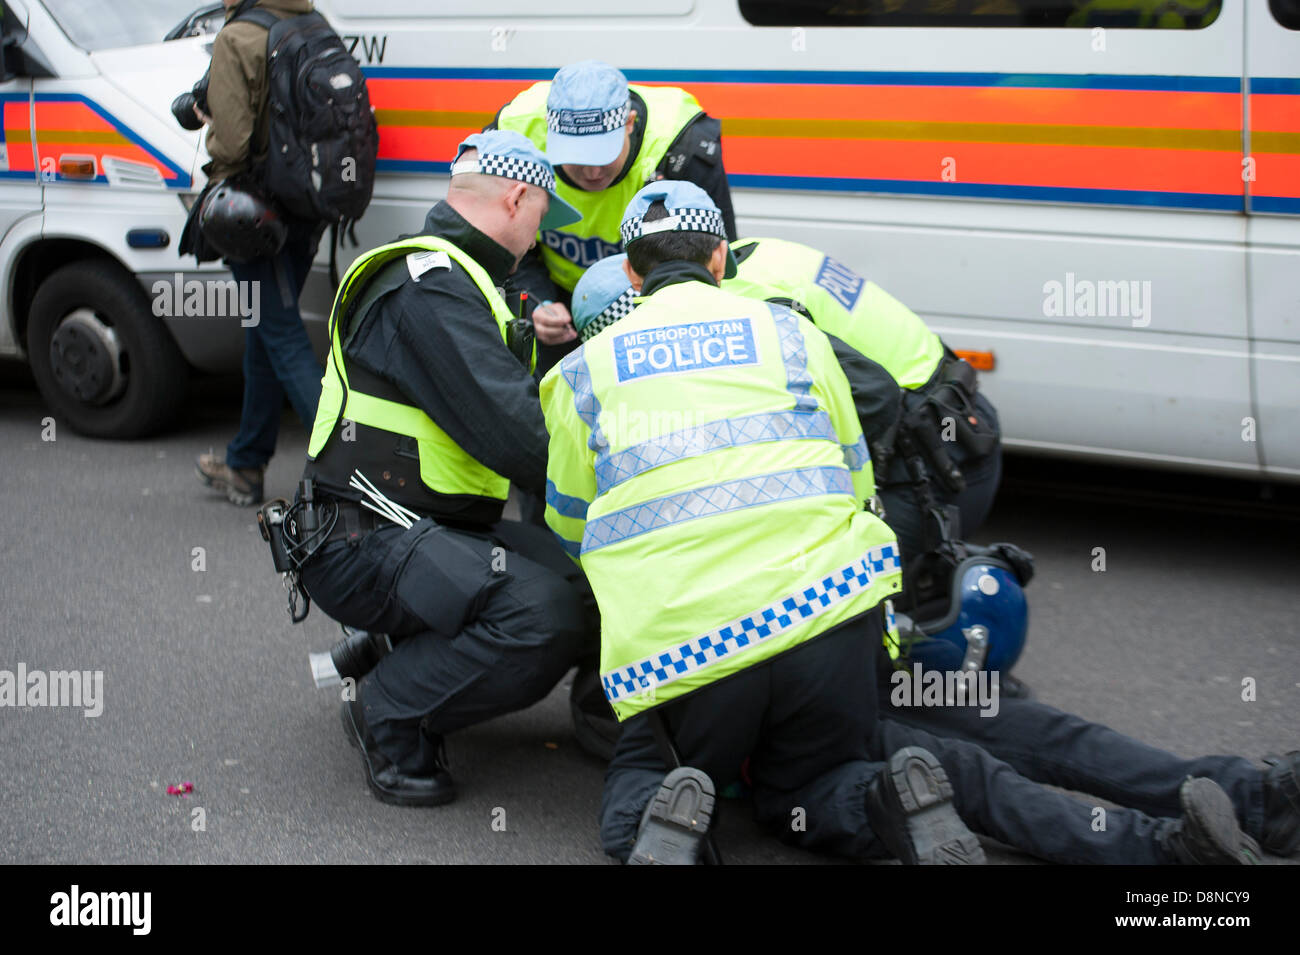 Police take action and arrest protesters refusing to let far right British National Party supporters march in central London,UK Stock Photo